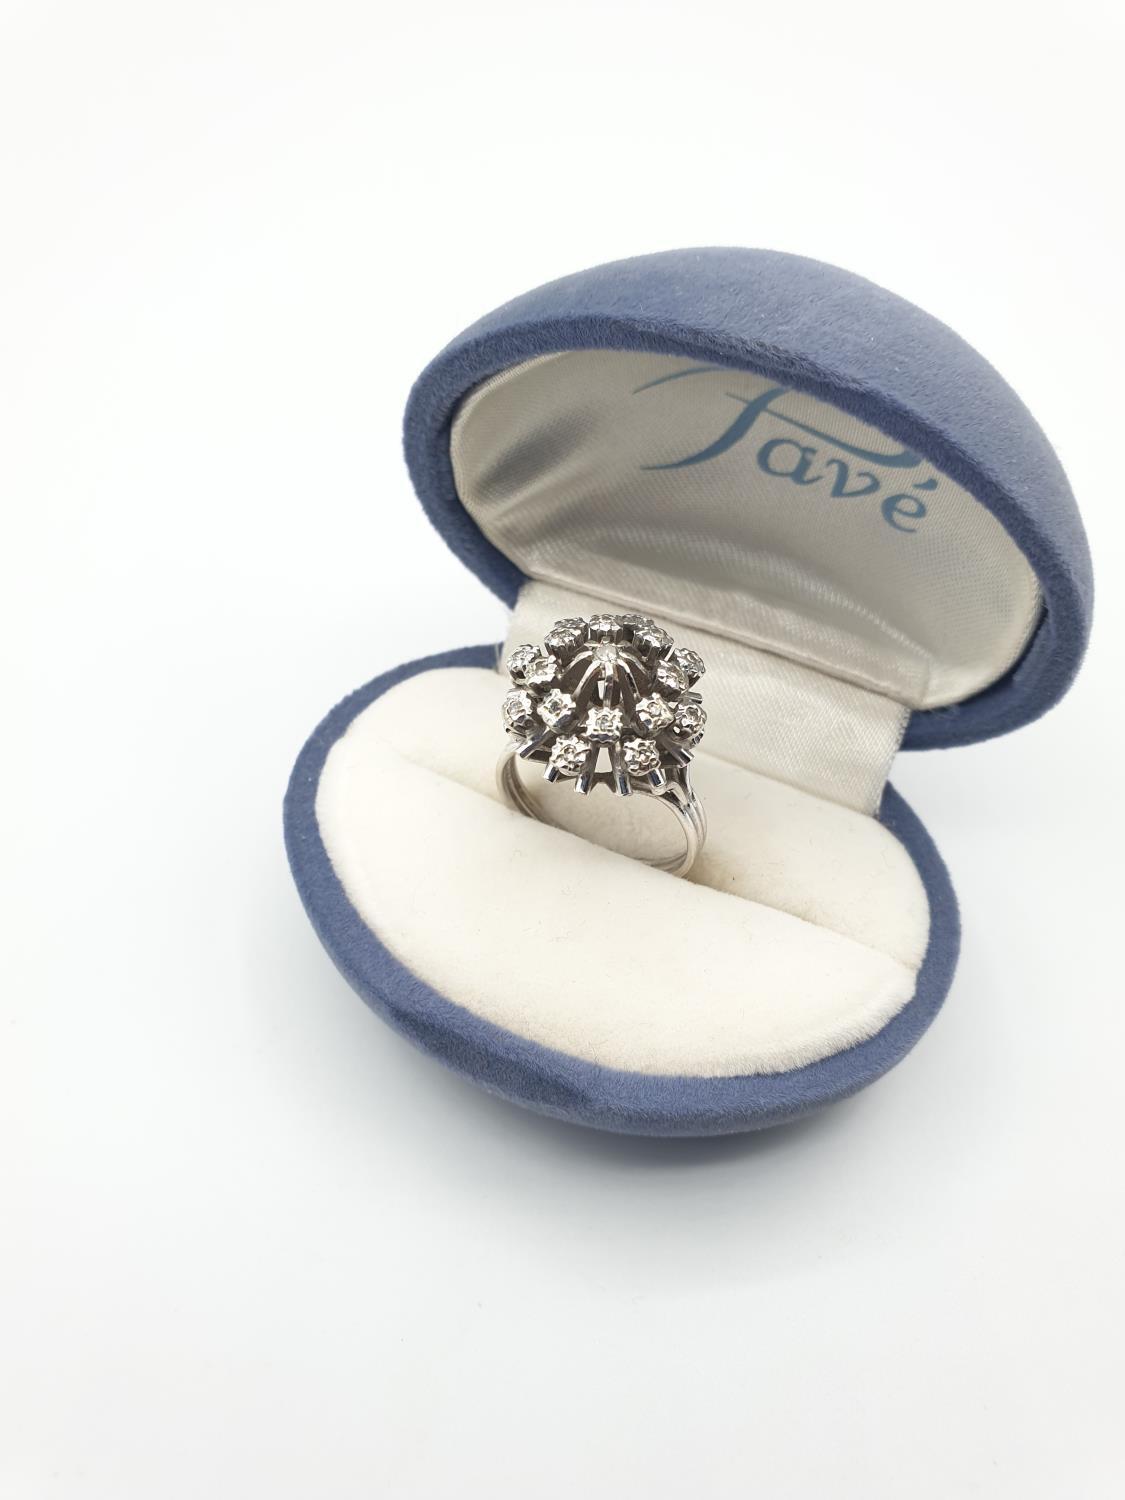 18CT WHITE GOLD DIAMOND CLUSTER RING, SIZE M WEIGHT 6.2G. Hallmark inside the band showing 750 for